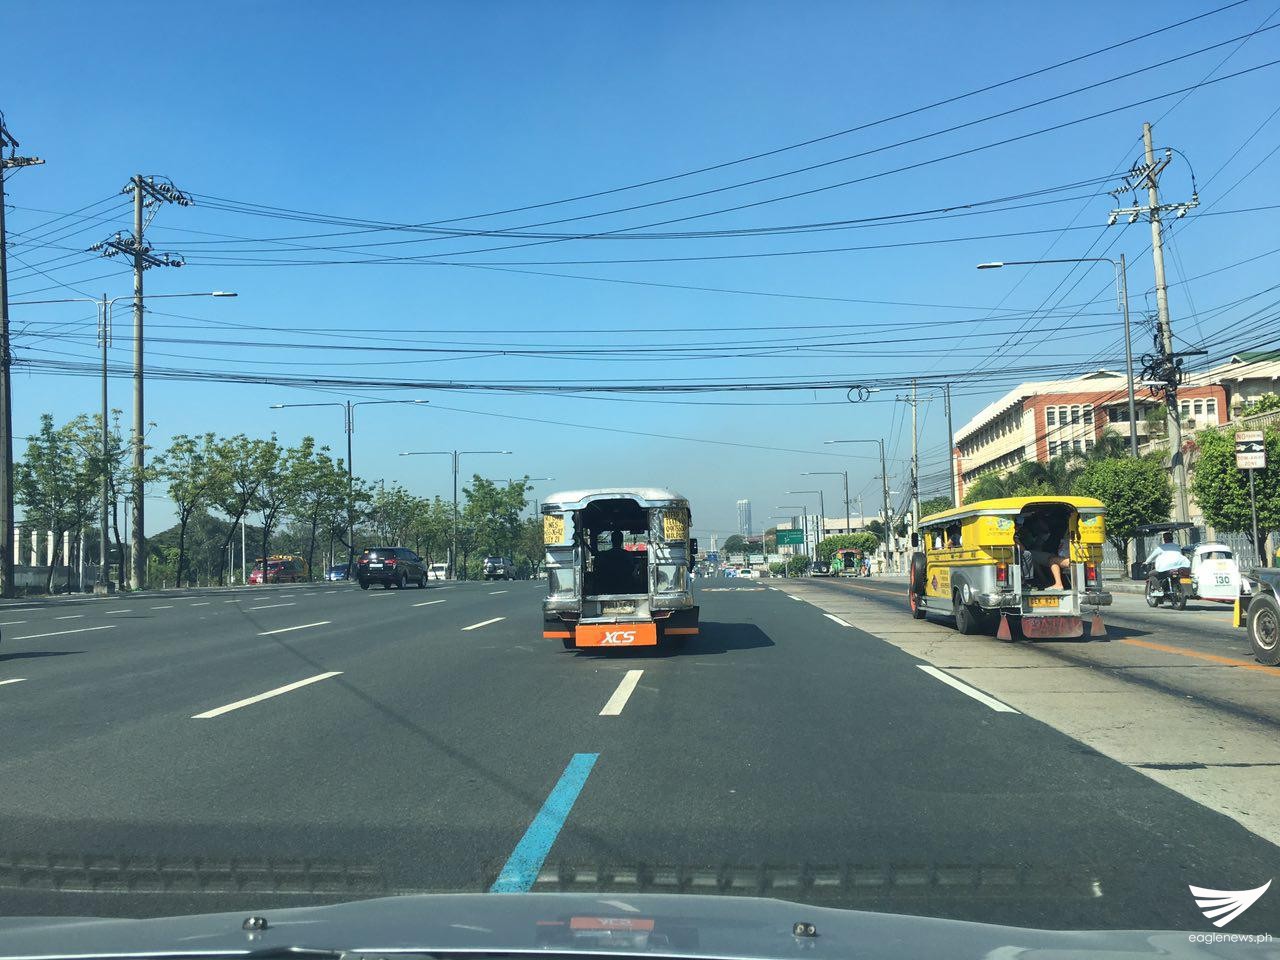 FILE PHOTO: There were almost no vehicles plying Commonwealth Ave. on Thursday morning. Meanne Corvera, Eagle News Service